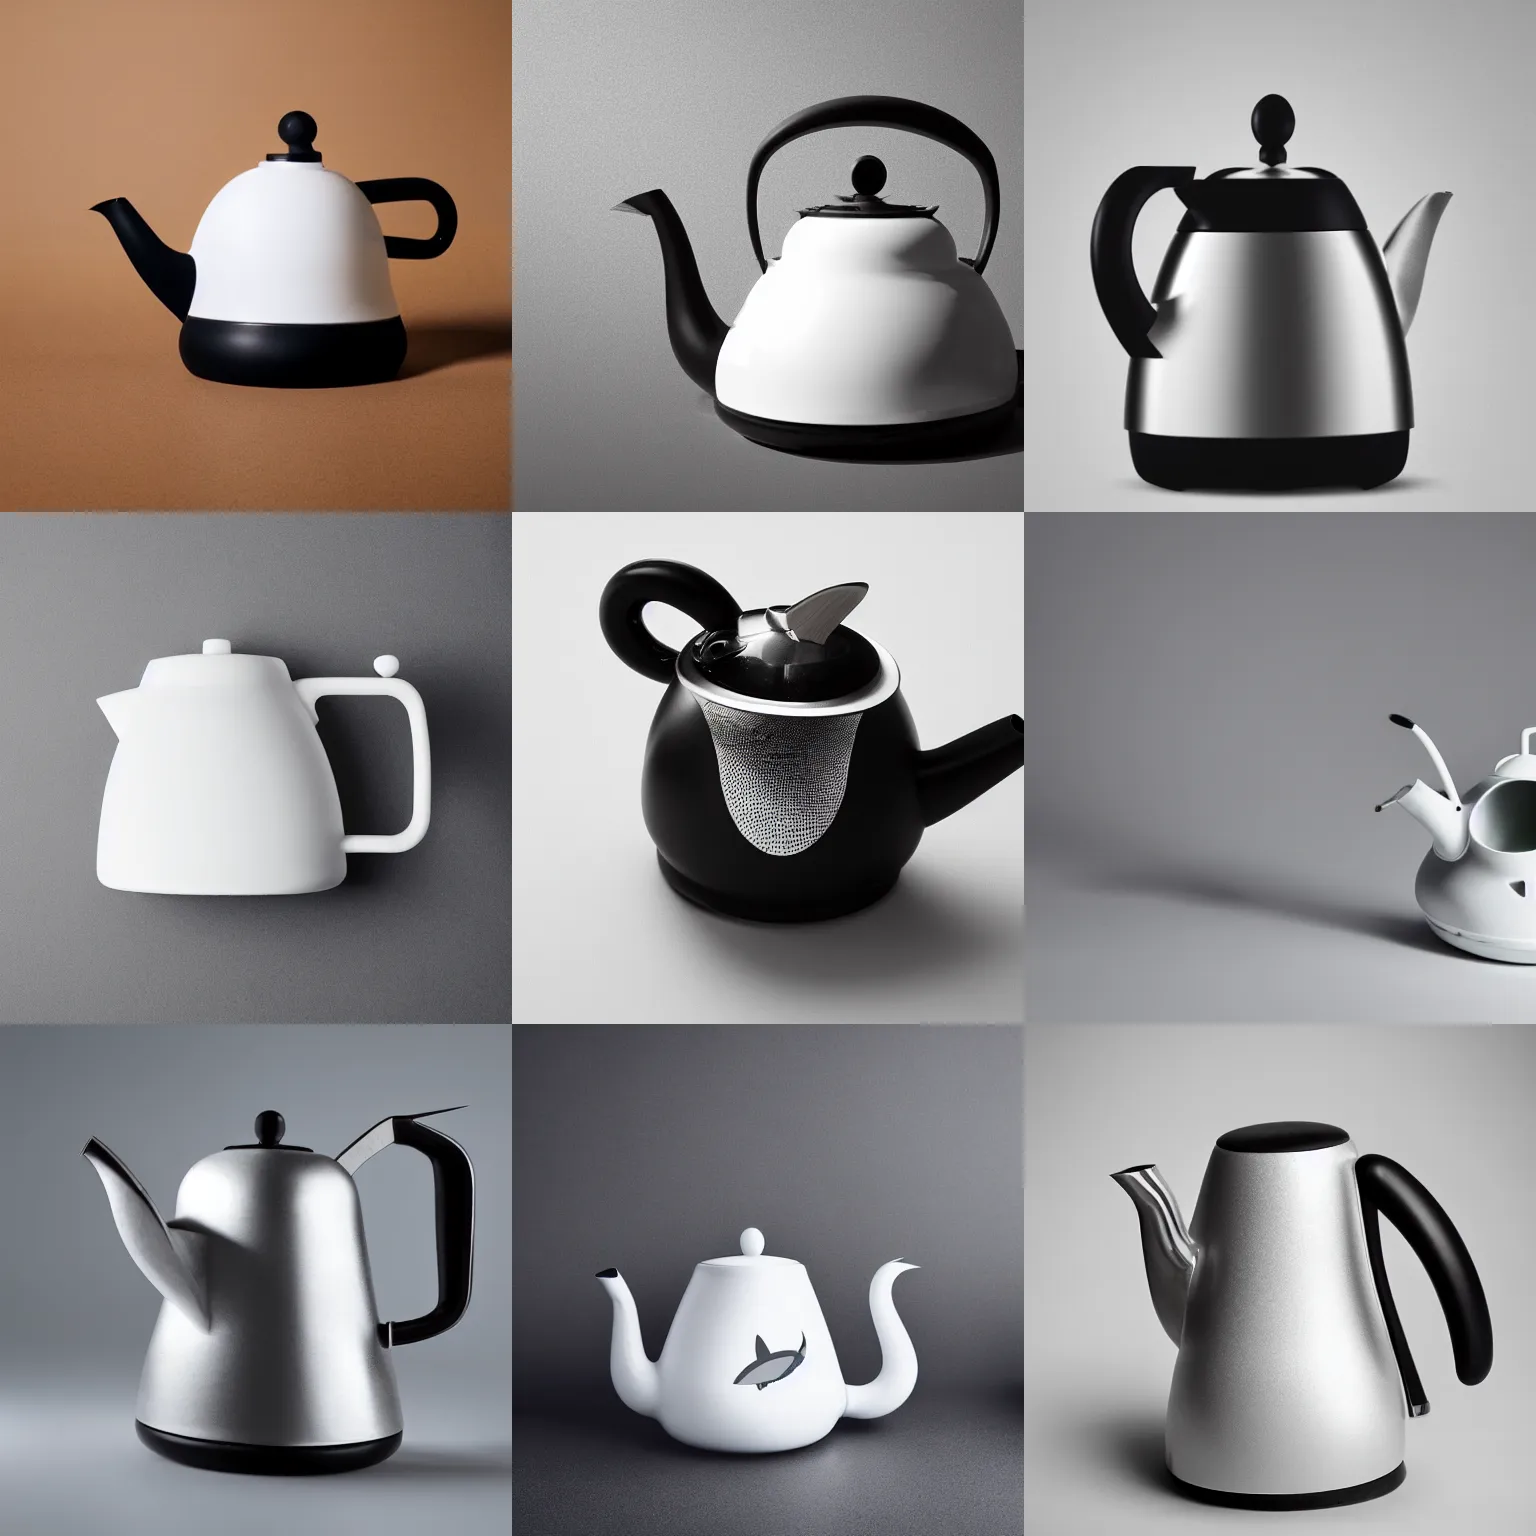 A glass of Tea and a Kettle by Siam Dousel on Dribbble